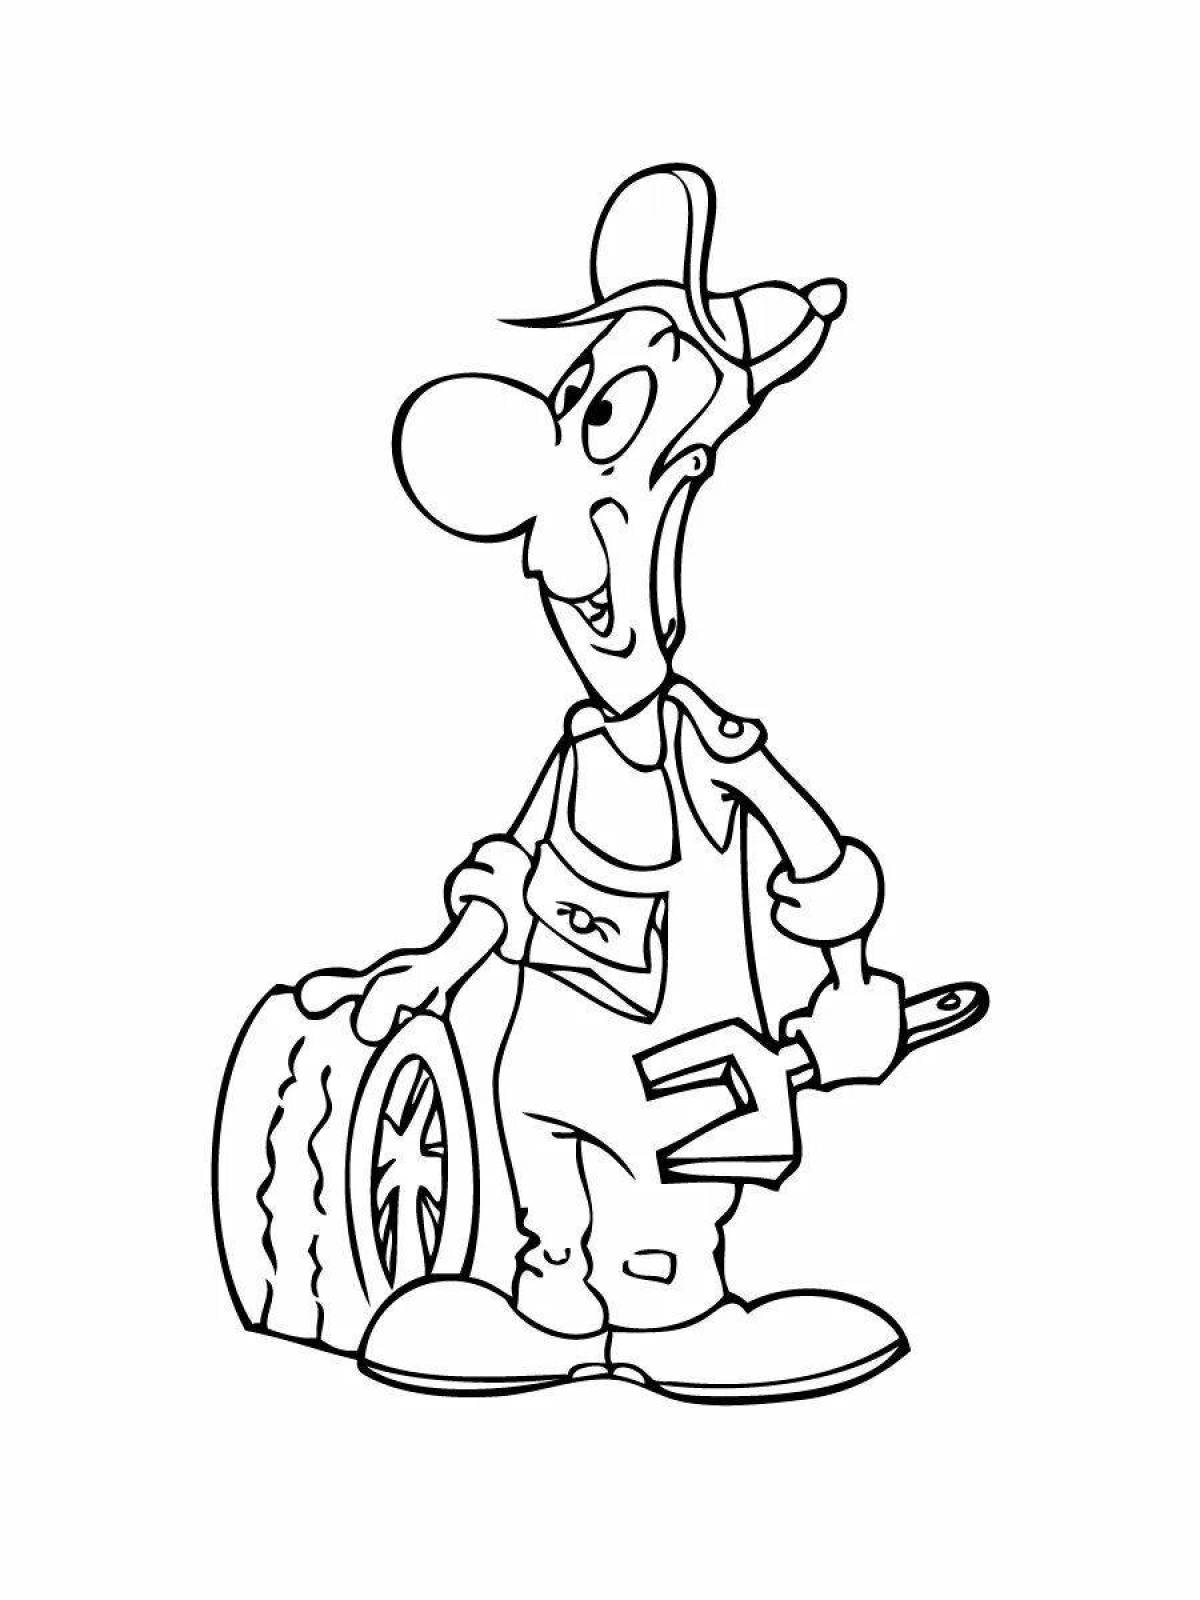 Exciting auto mechanic profession coloring book